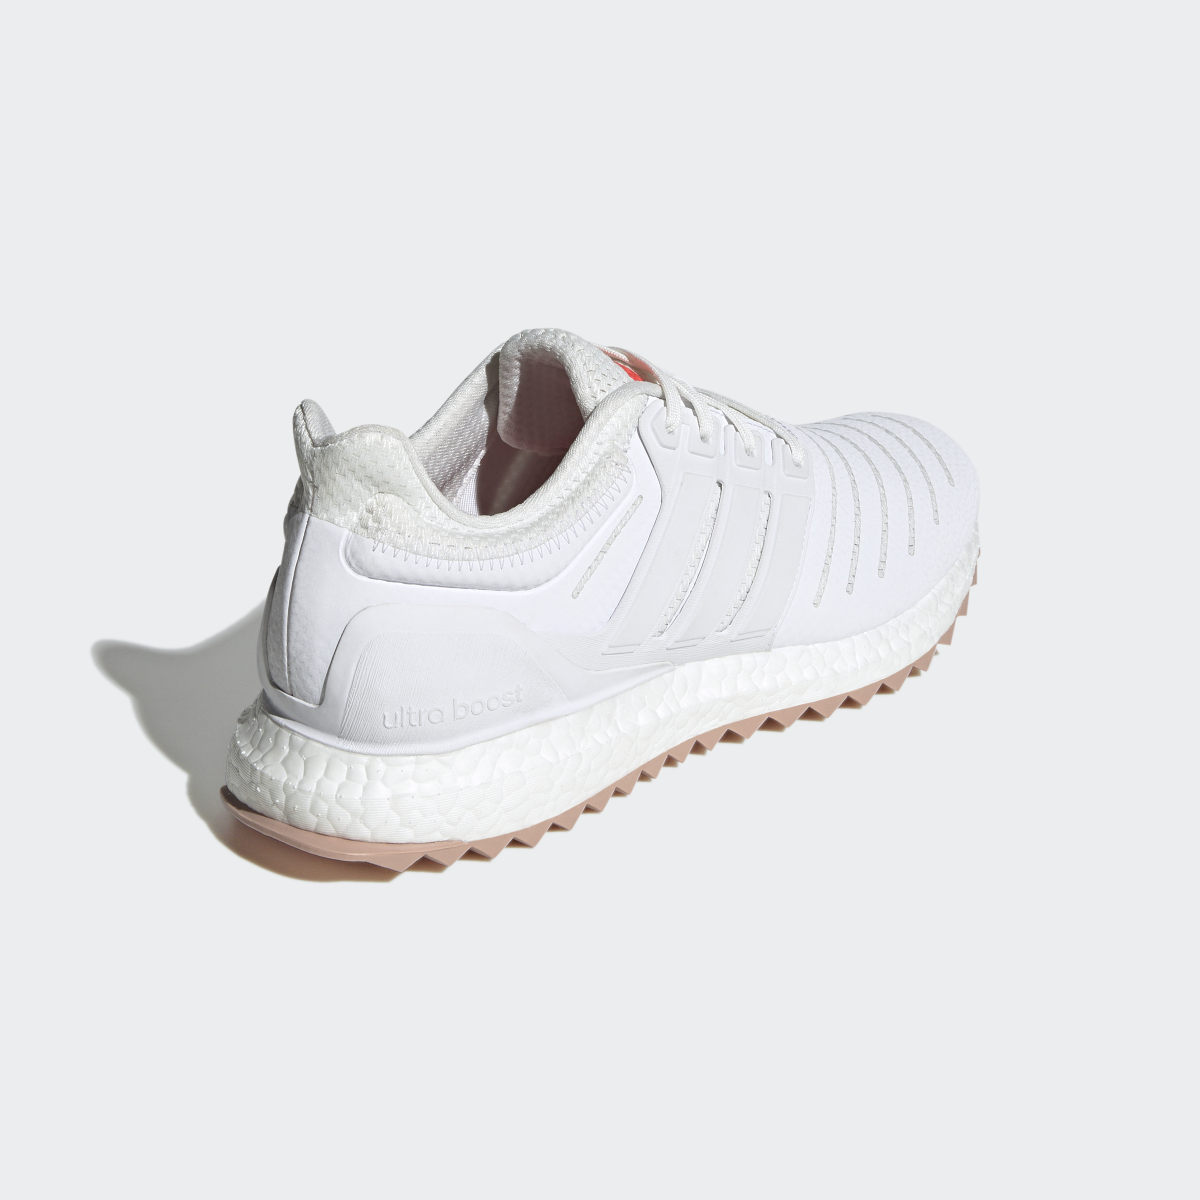 Adidas Chaussure Ultraboost DNA XXII Lifestyle Running Sportswear Capsule Collection. 6